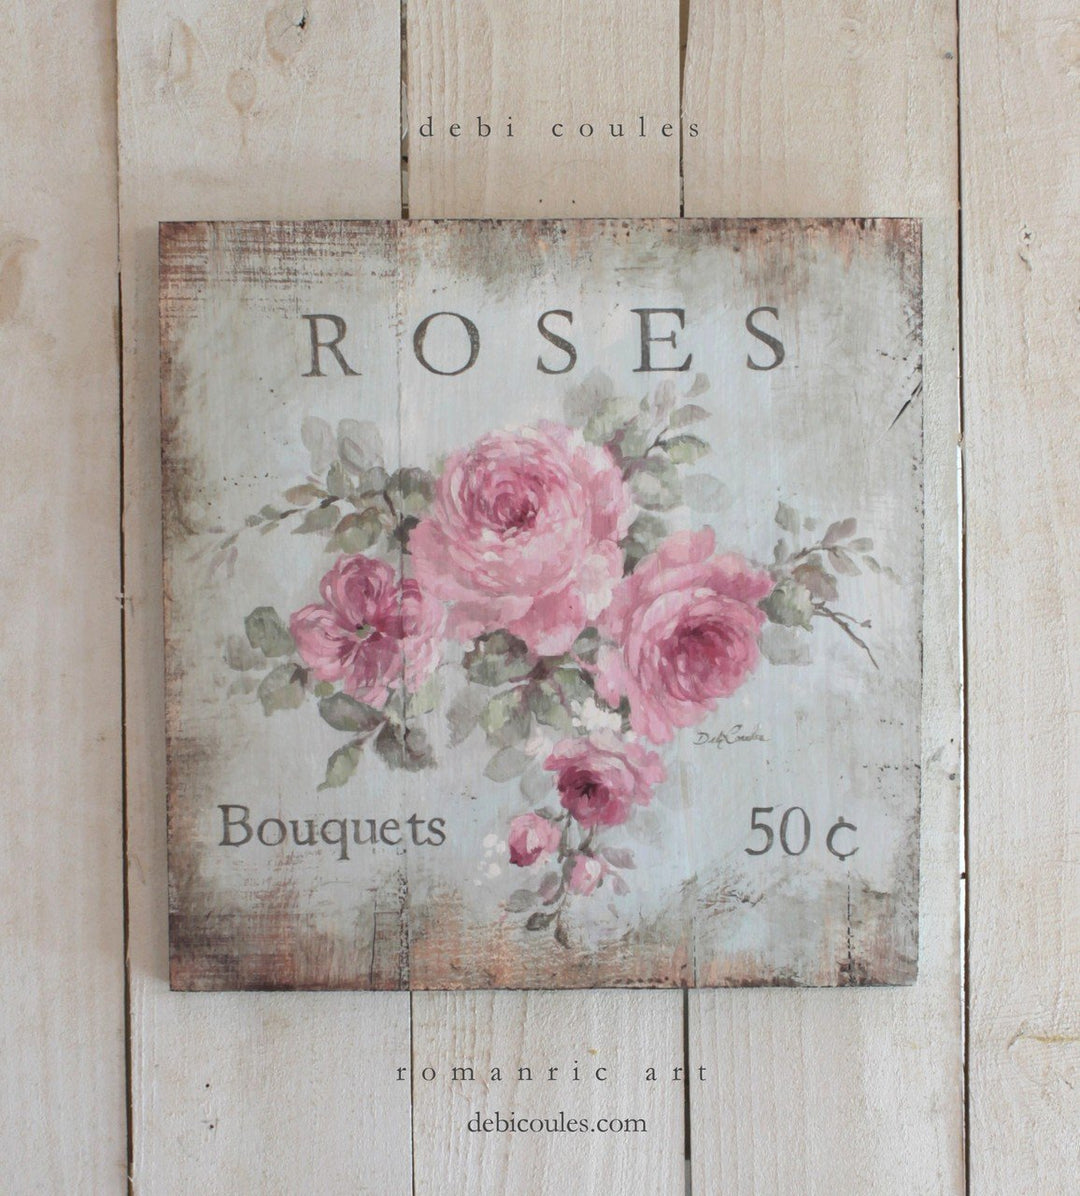 Pink Roses 50 Cents Wooden Sign, Rustic Floral Wall Art By Debi Coules,  Roses Sign with pinkish purple flowers, Printed on wood panel, distressed, aged look, blue green background, Wall Art, Shabby, French, Farmhouse chic, Muted tones, Warm feeling